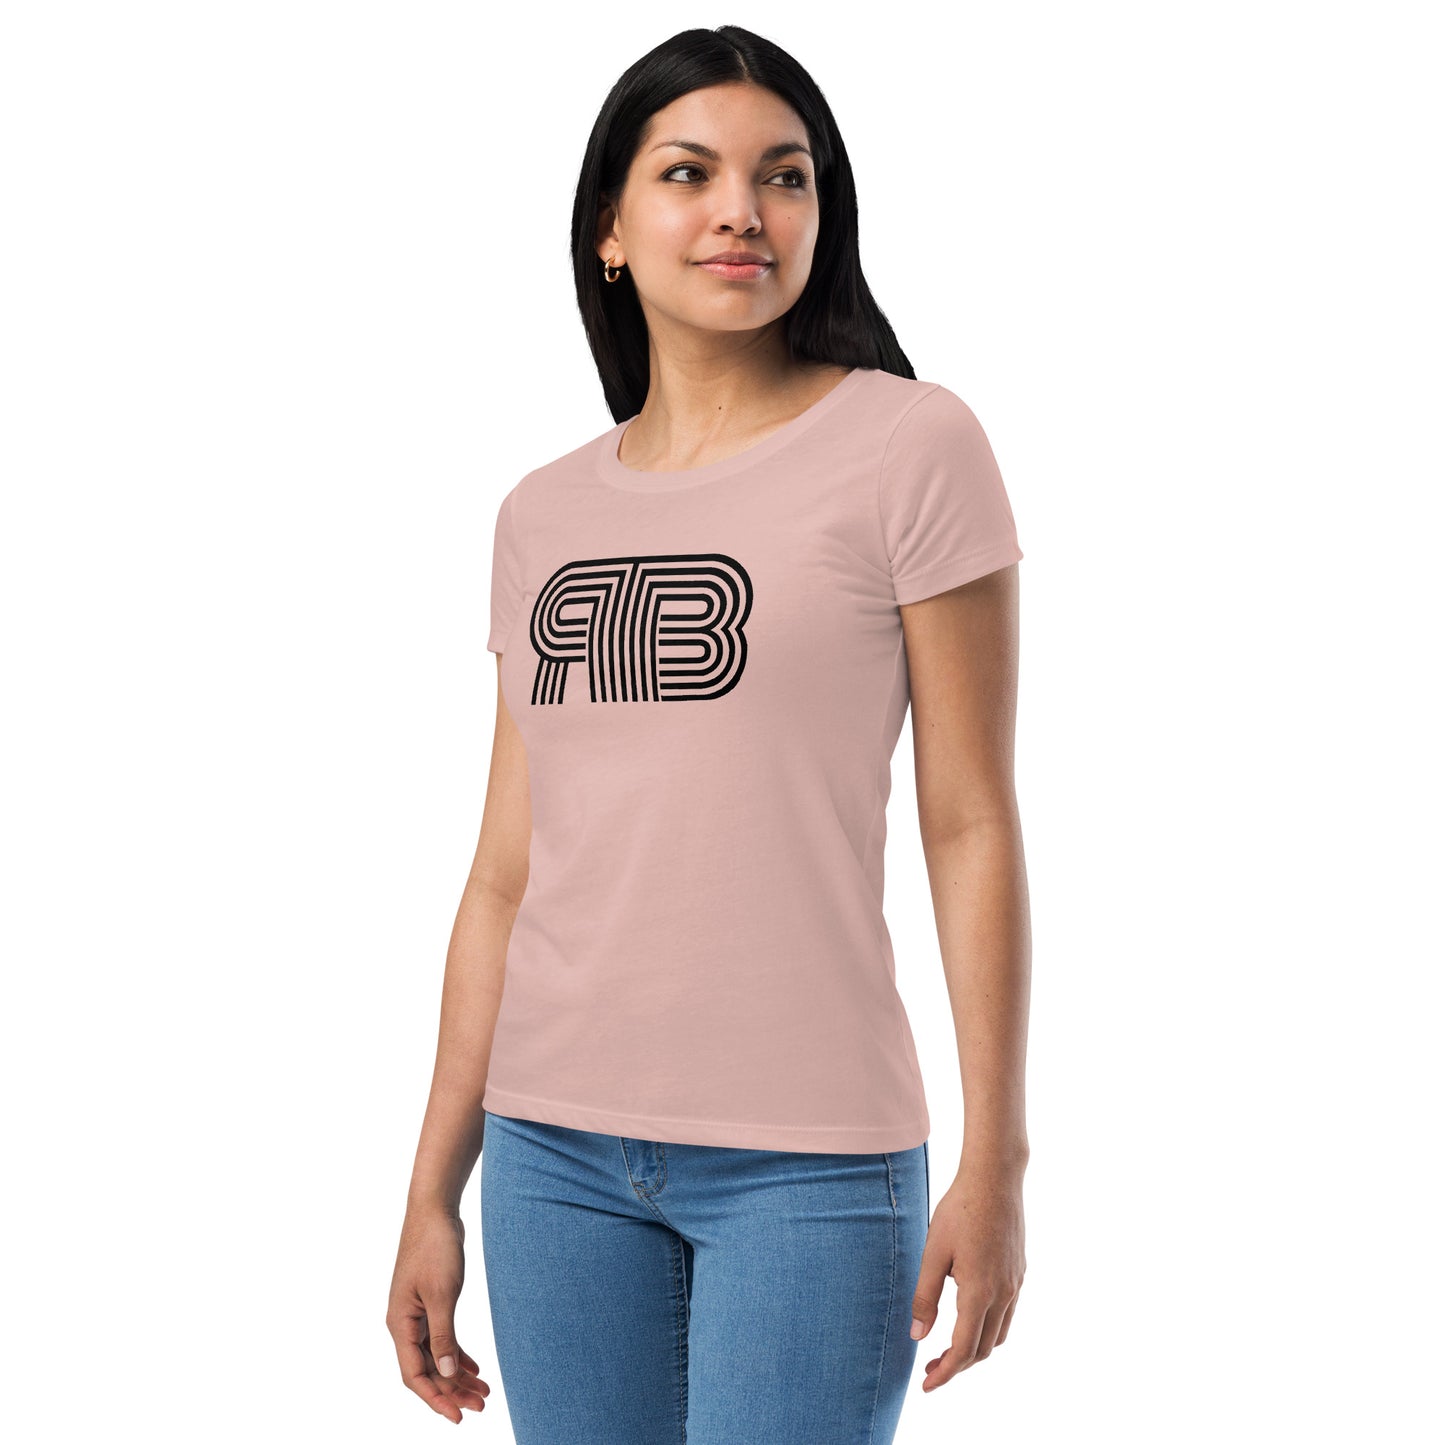 RB Women’s fitted t-shirt